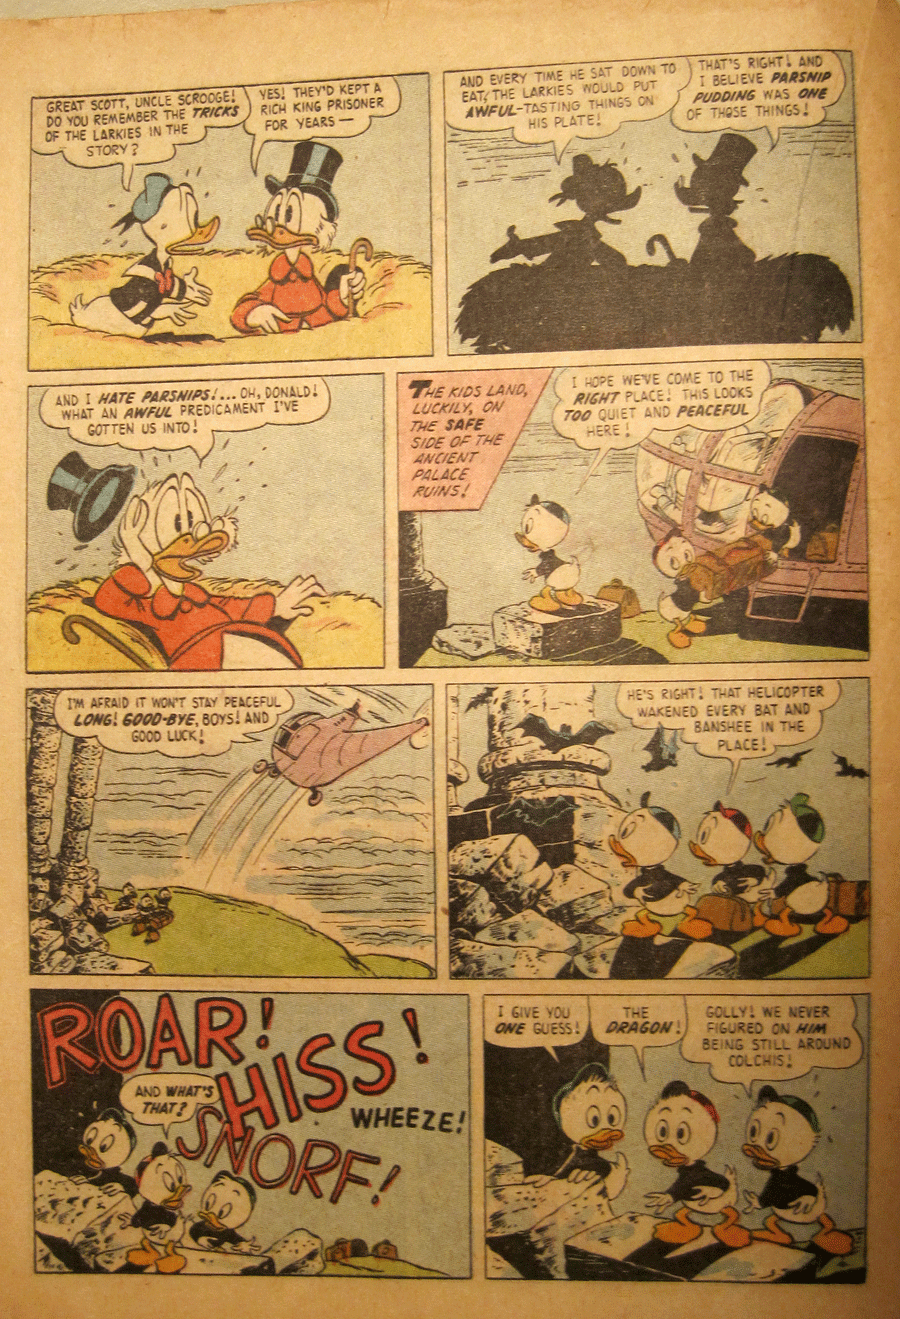 Comic book from 1949